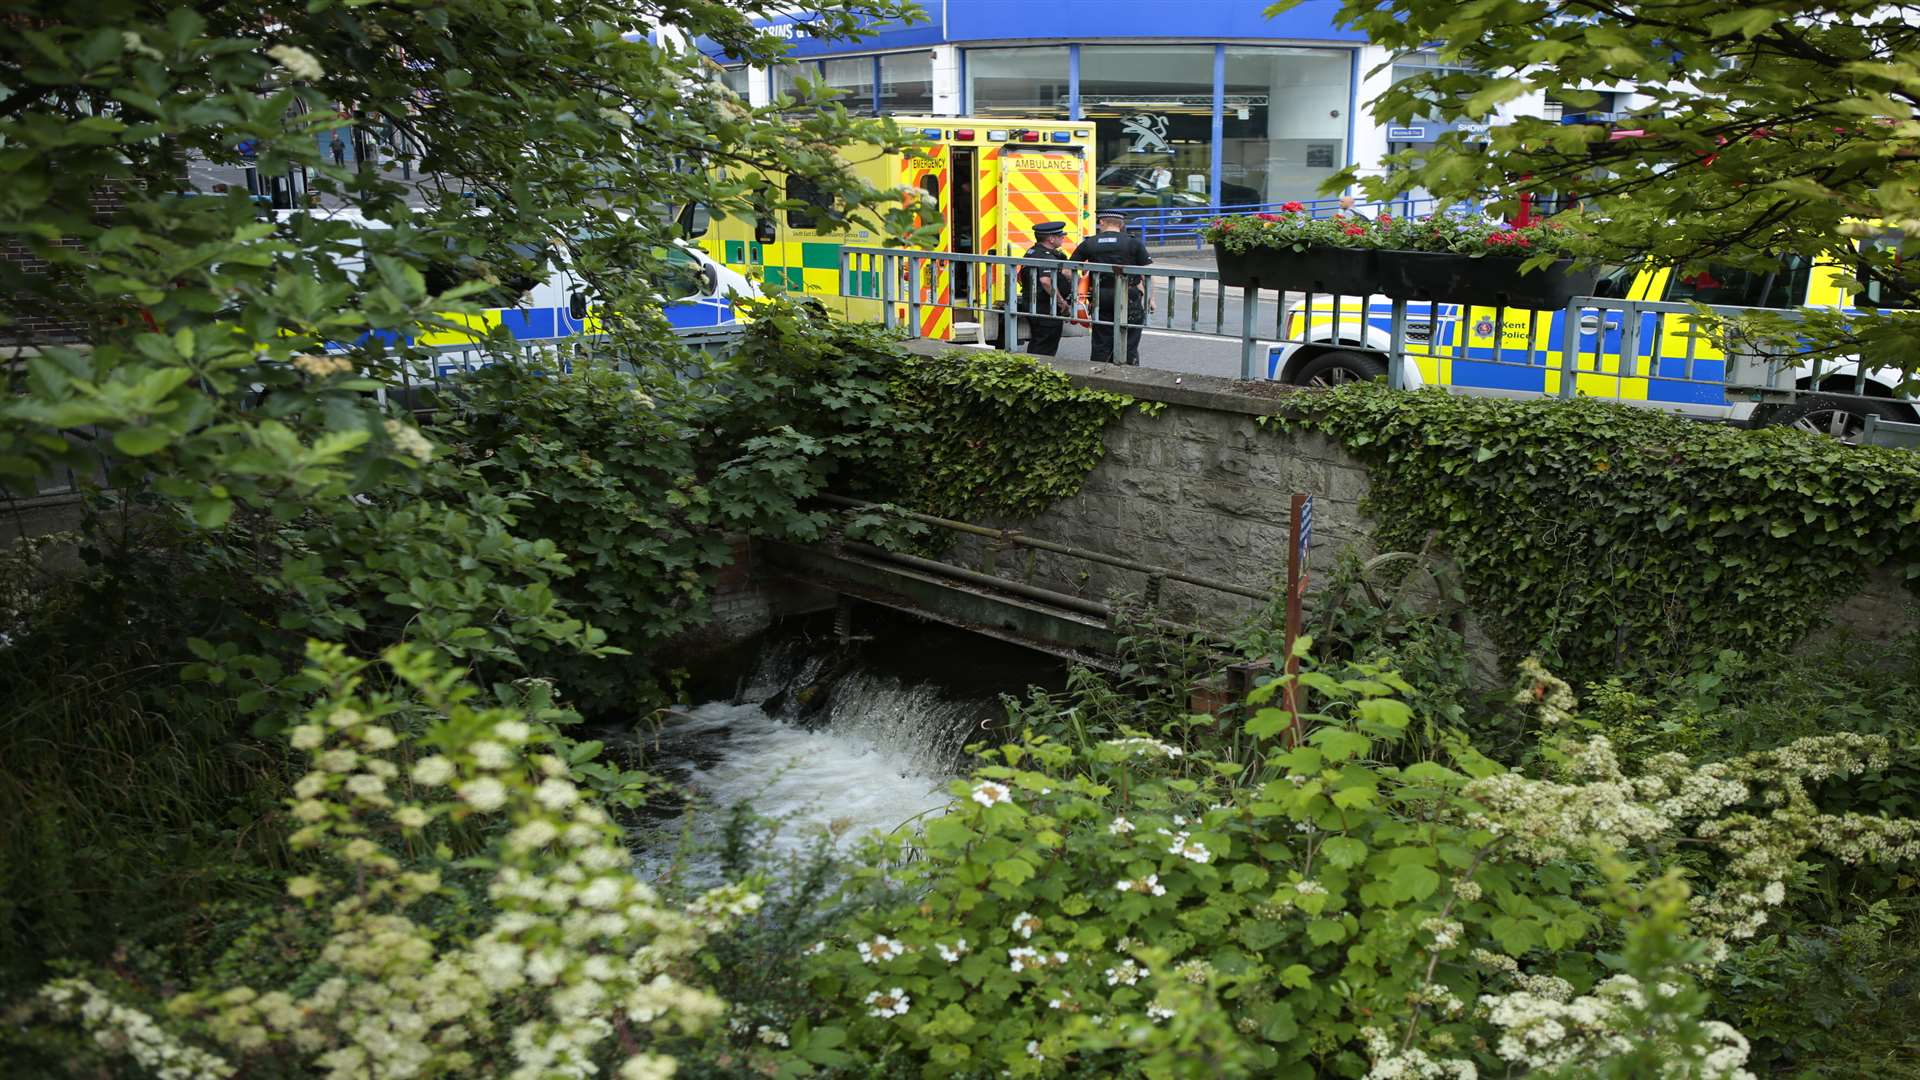 A young woman was pulled from the River Len